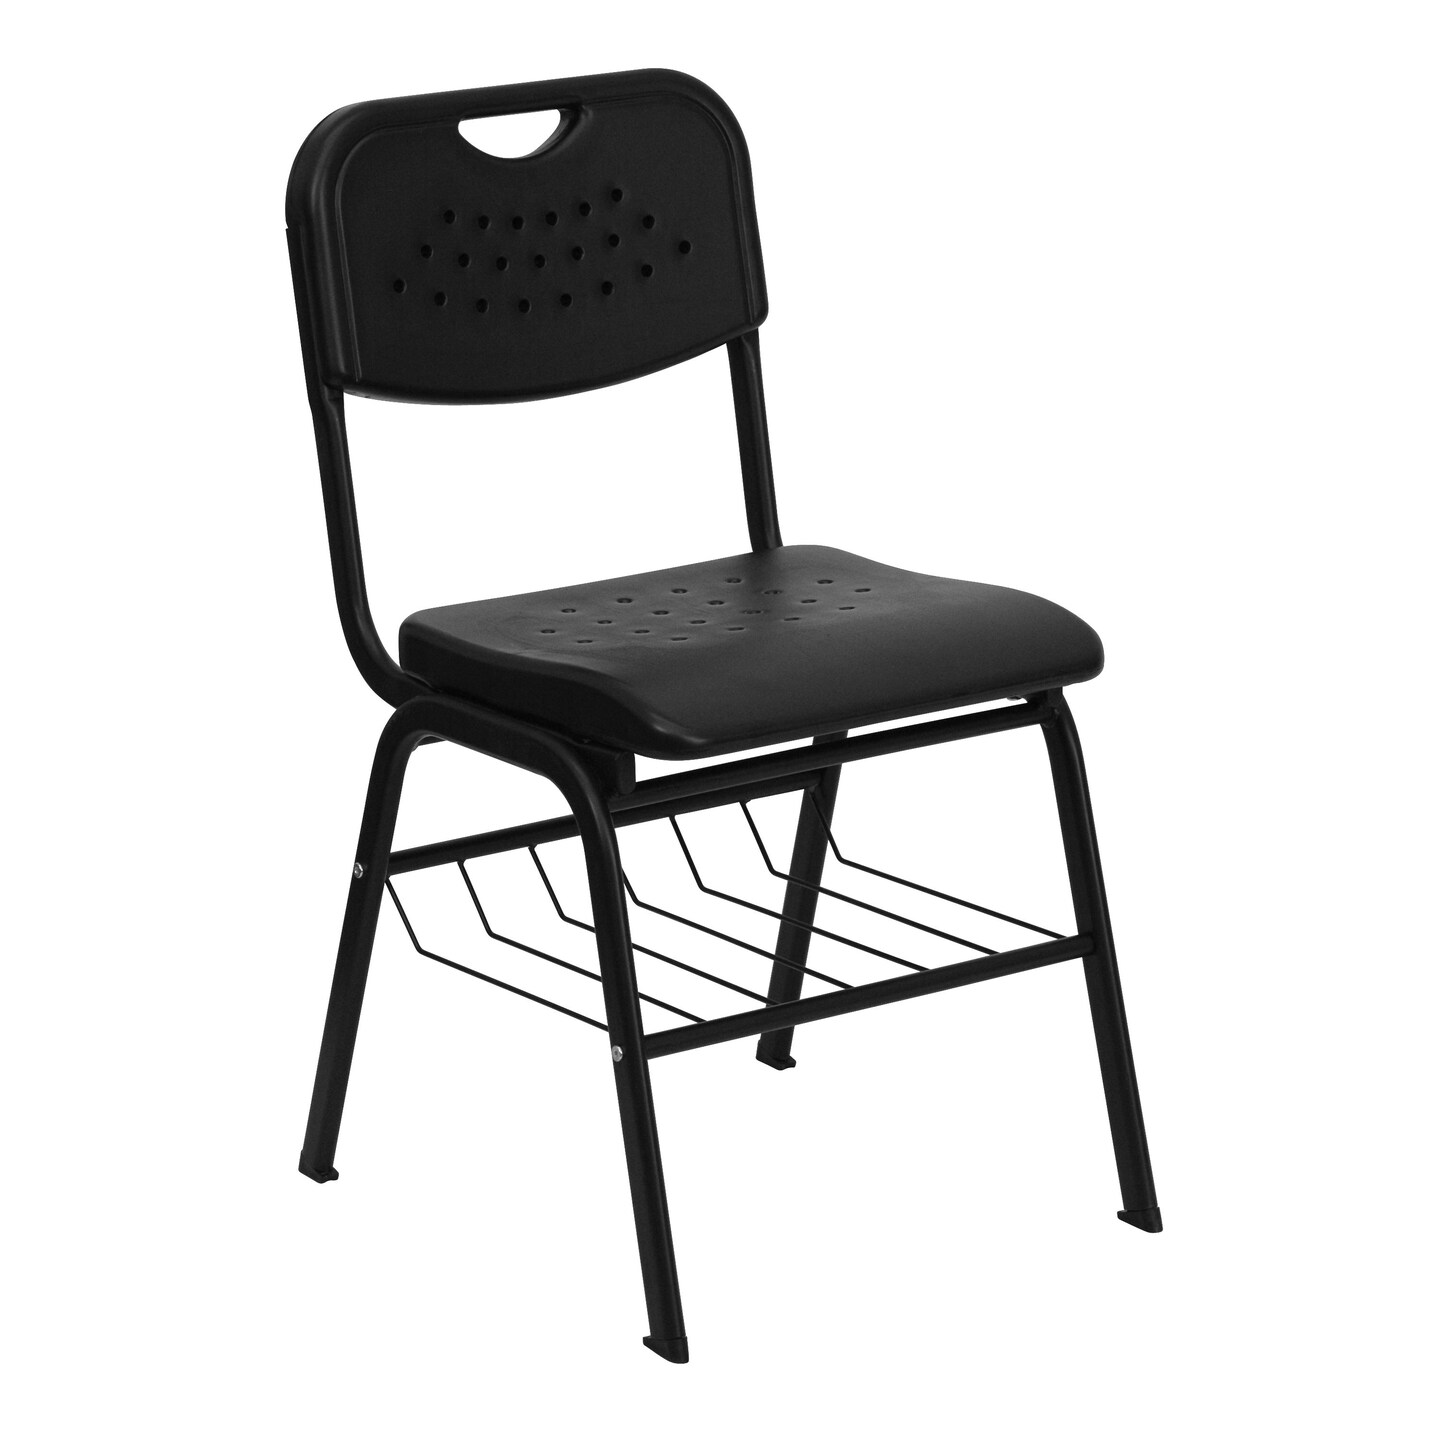 Emma and Oliver 880 lb. Capacity Plastic Chair with Book Basket